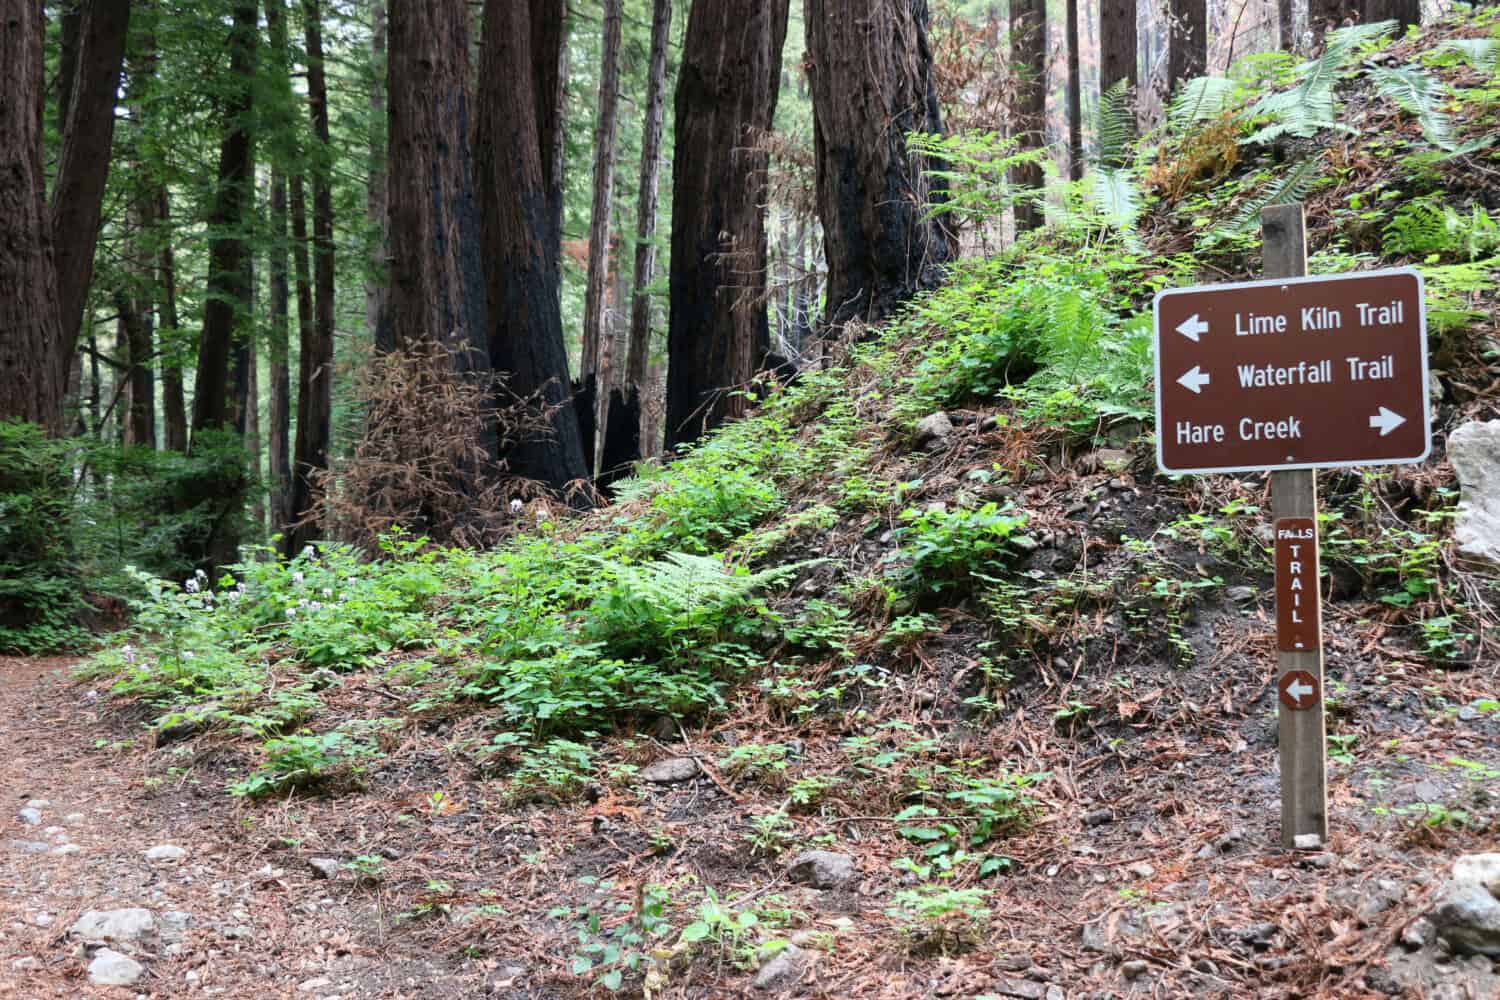 Signpost on a hiking trail, Limekiln State Park, Big Sur, CA.  The charred trunks of tall trees contrast with lush, bright green new growth on the forest floor.